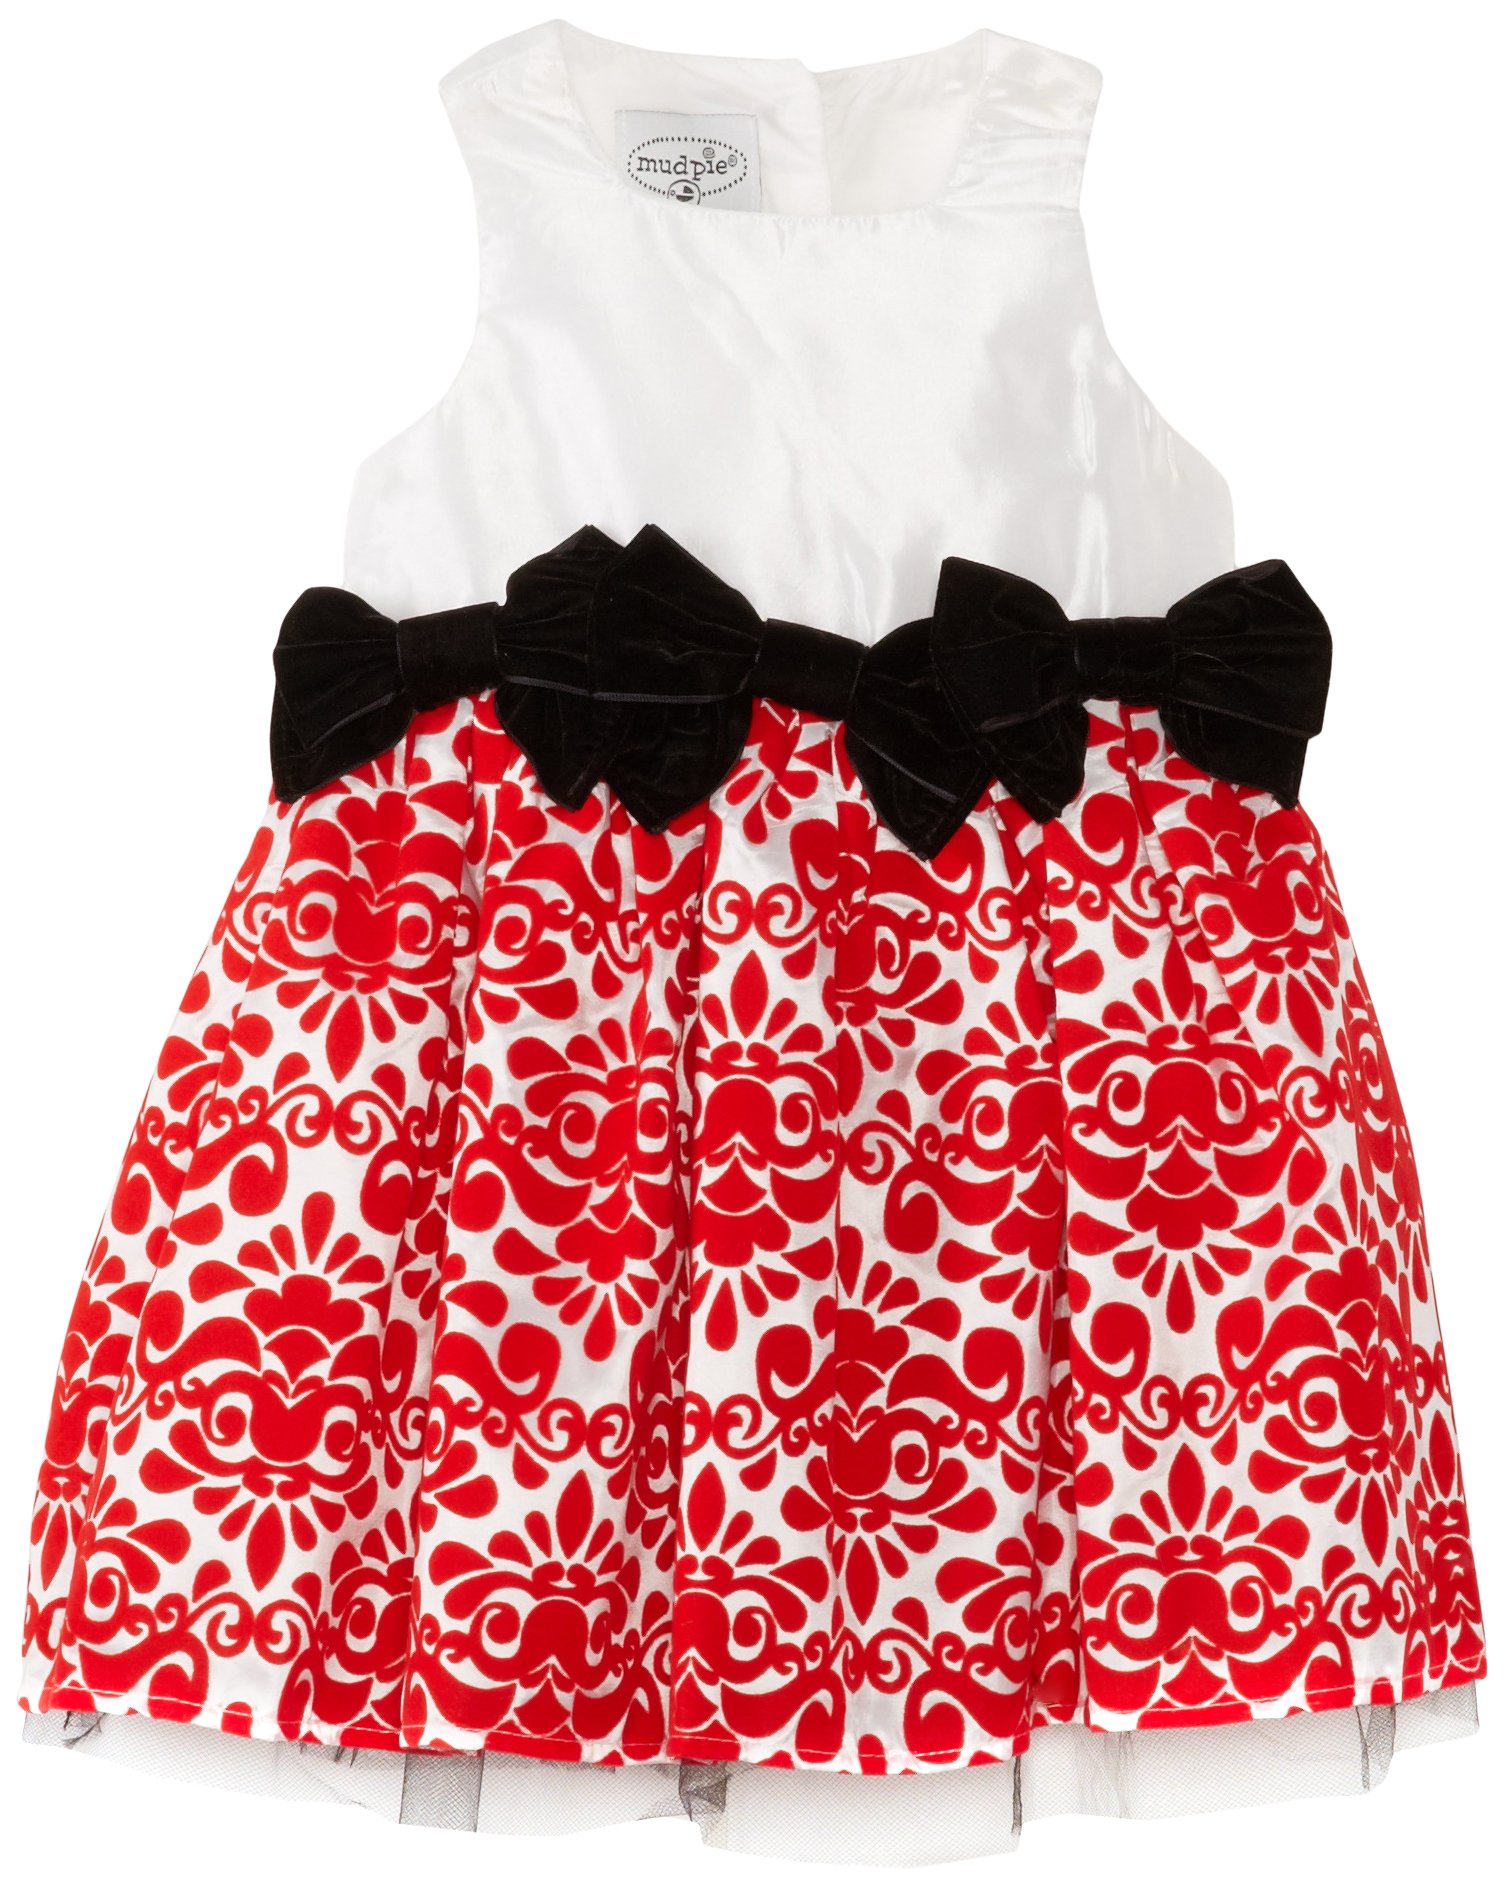 Mud Pie Baby Toddler Little Girls Red Damask Christmas Dress Size 2T